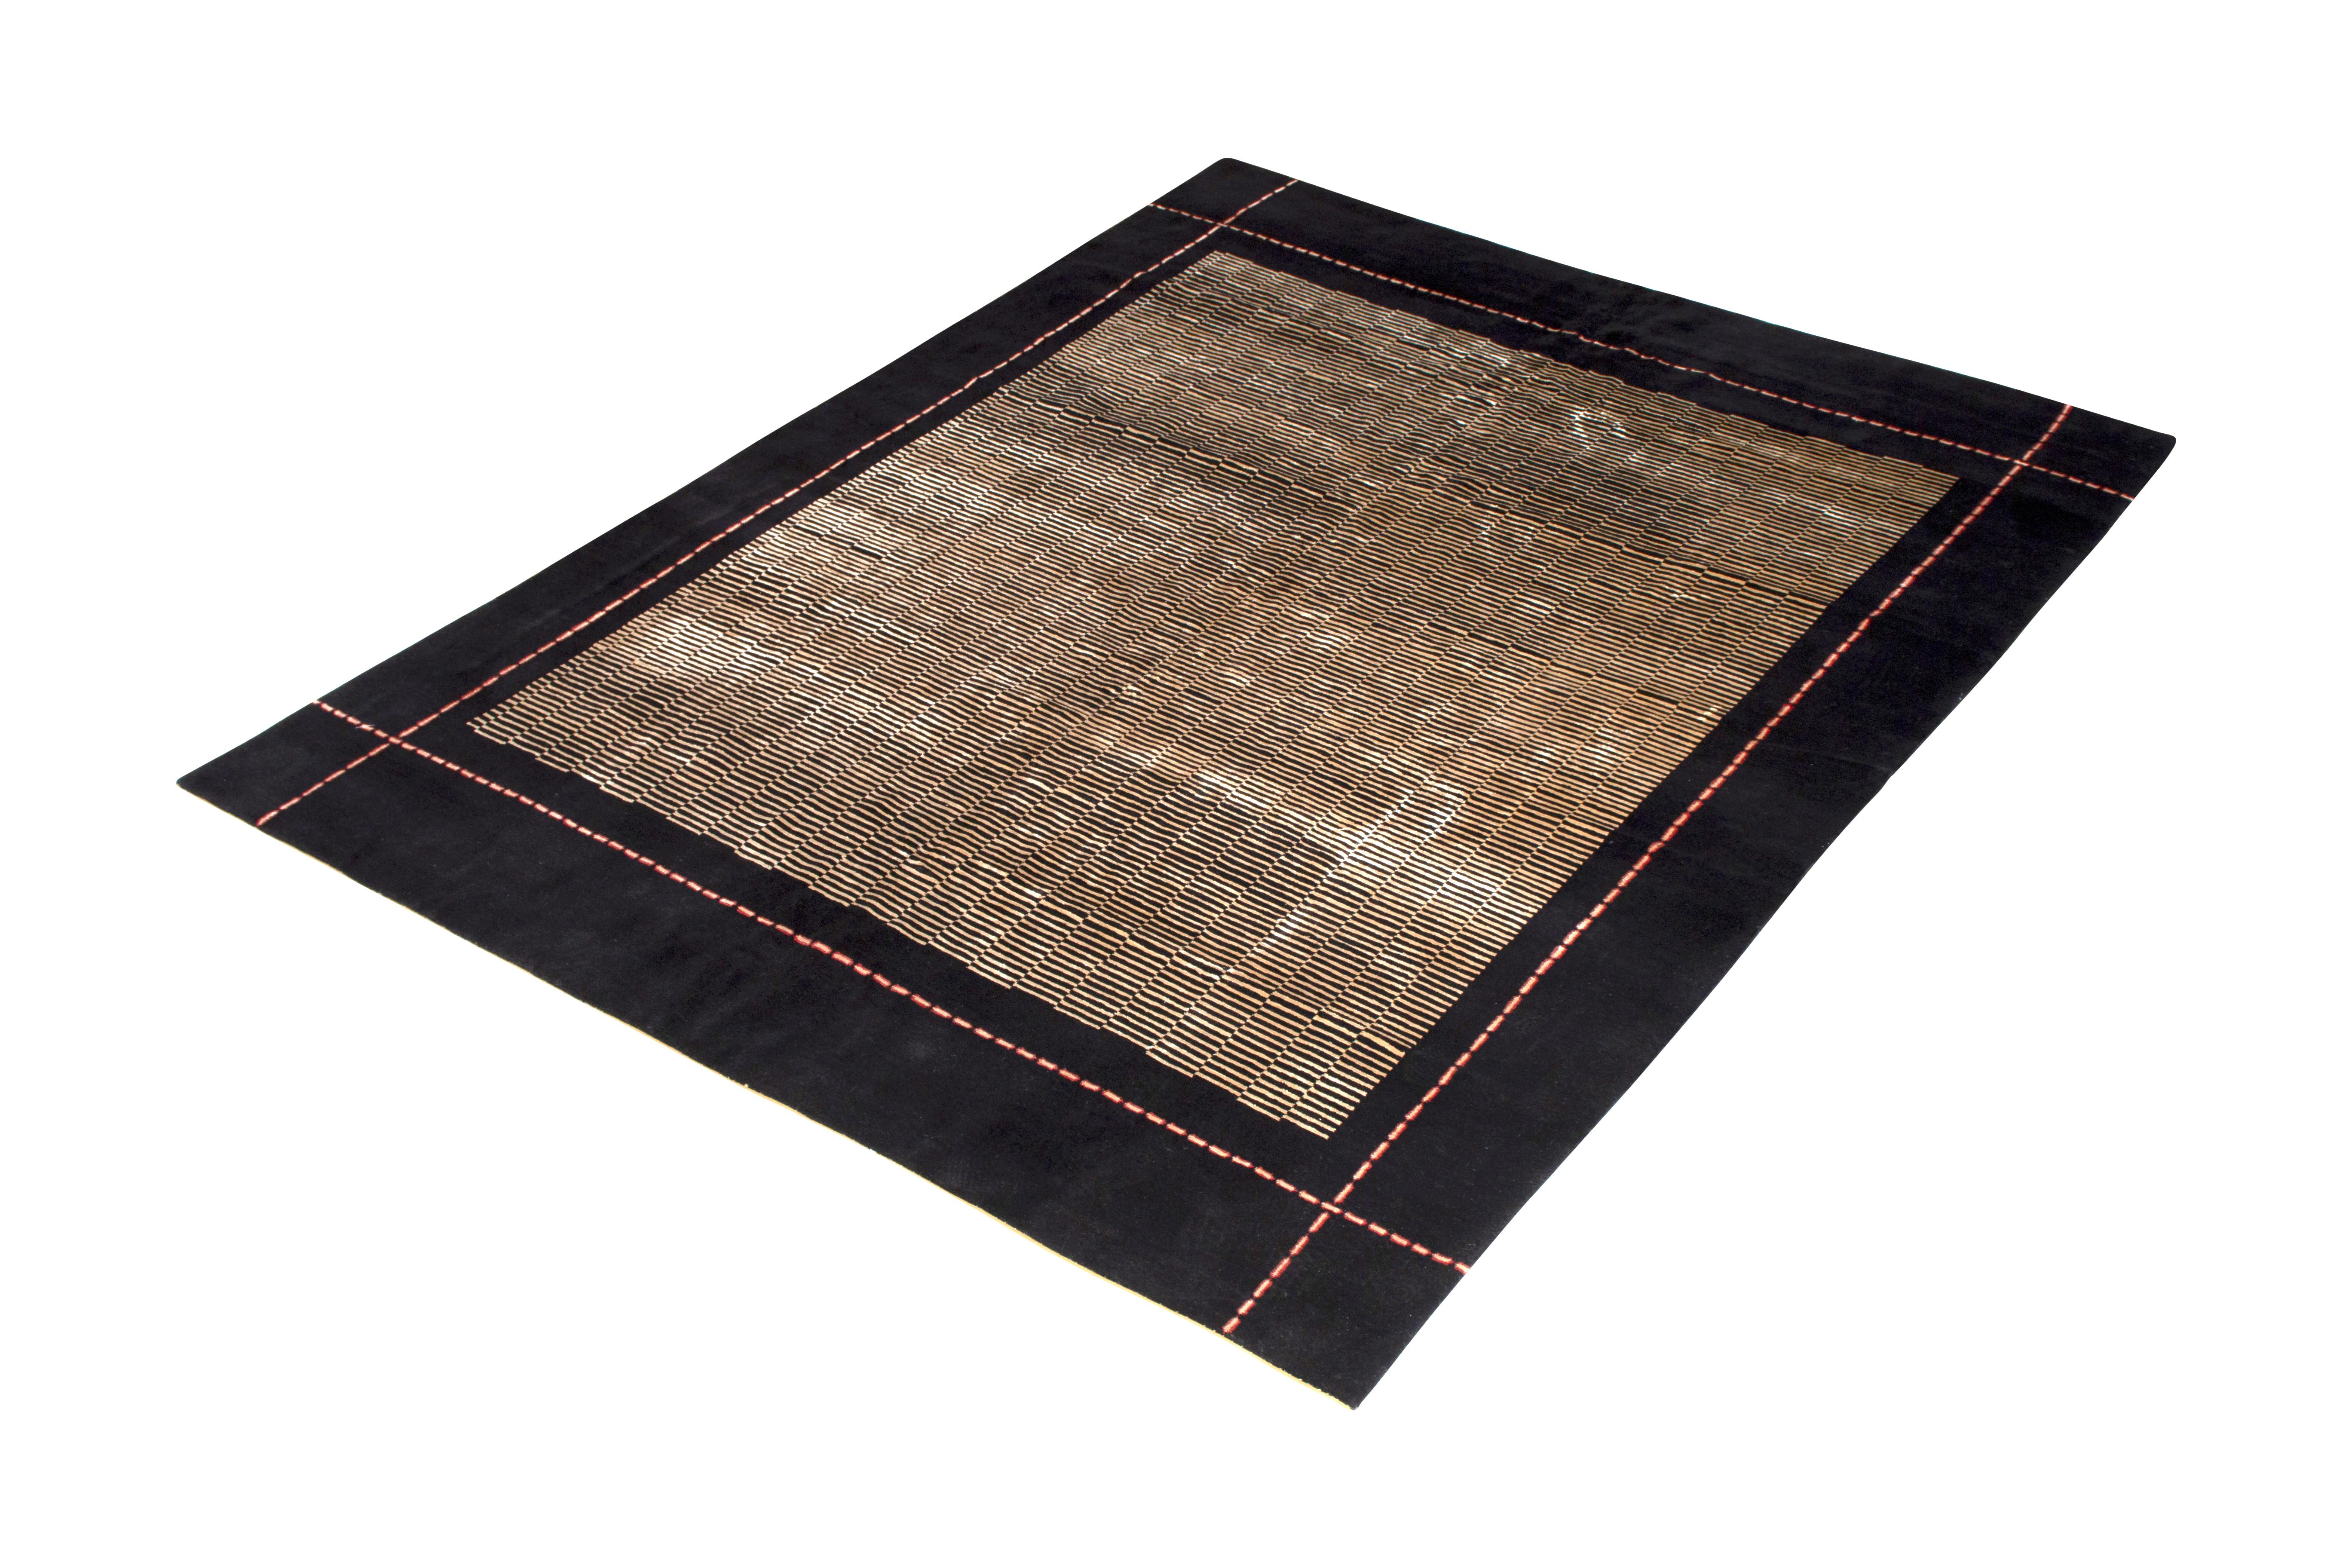 An 8x10 Art Deco rug inspired from Austrian Secession styles, joining the European Collection by Rug & Kilim. Hand knotted in wool and silk, enjoying rich beige-brown and black hues complemented by a natural luster. 

On the design: Subtlety in